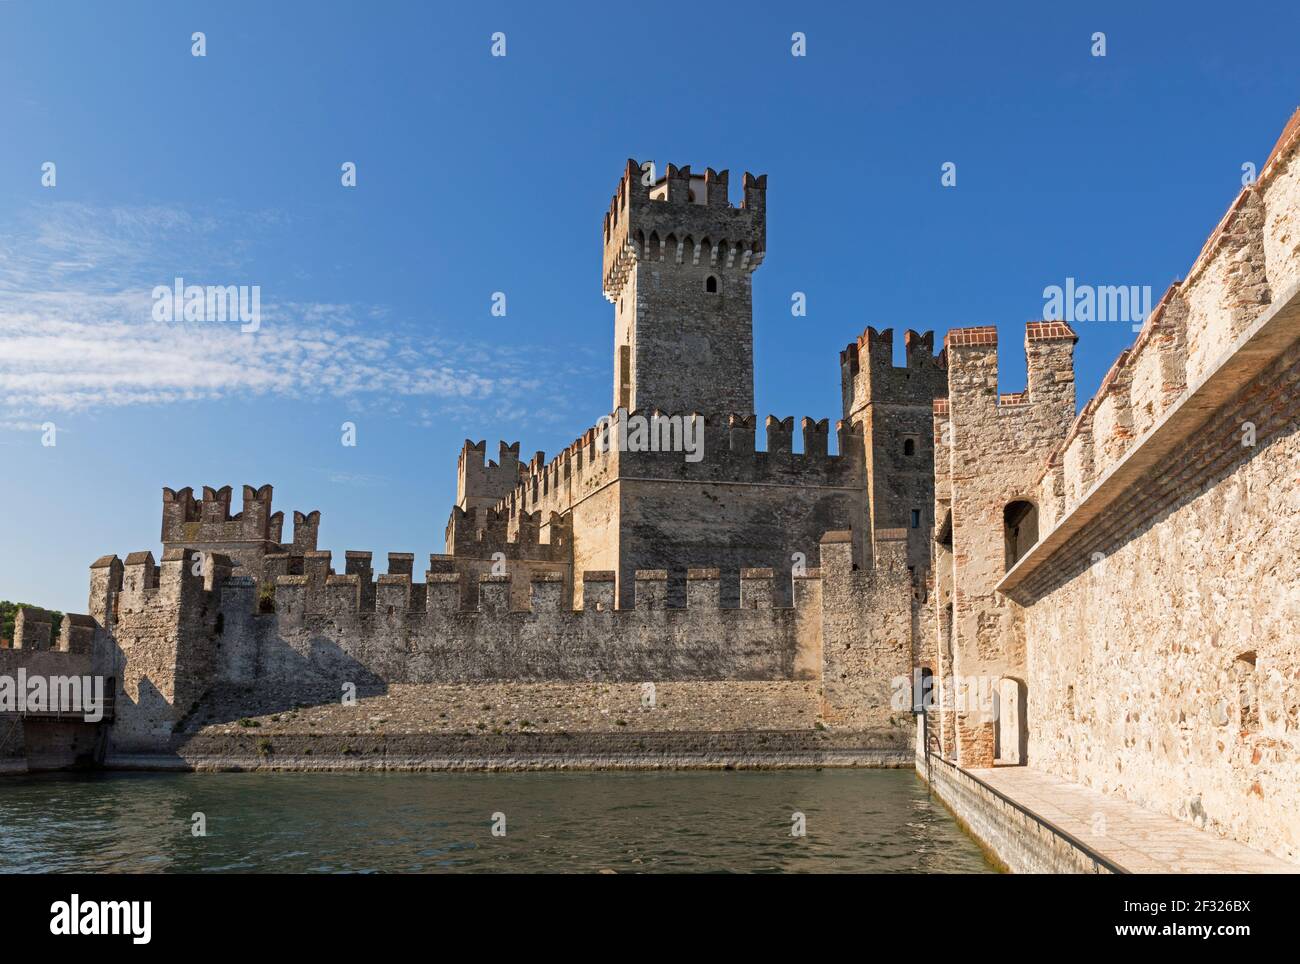 Italy,Sirmione, Lake Garda, the Rocca Scaligera castle built in the 13th century Stock Photo